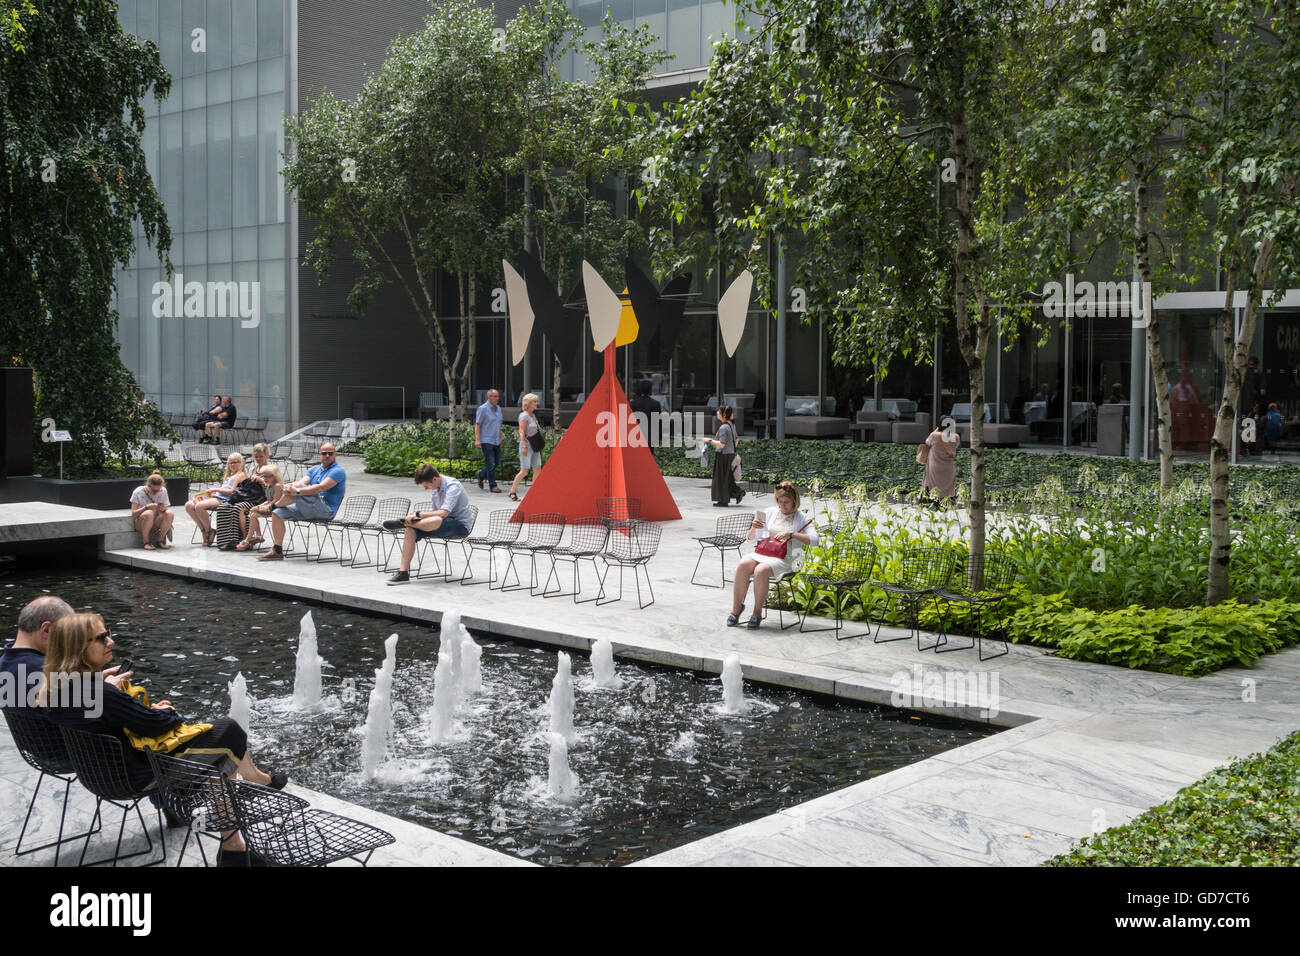 Oasis in the City The Abby Aldrich Rockefeller Sculpture Garden at The
Museum of Modern Art Epub-Ebook